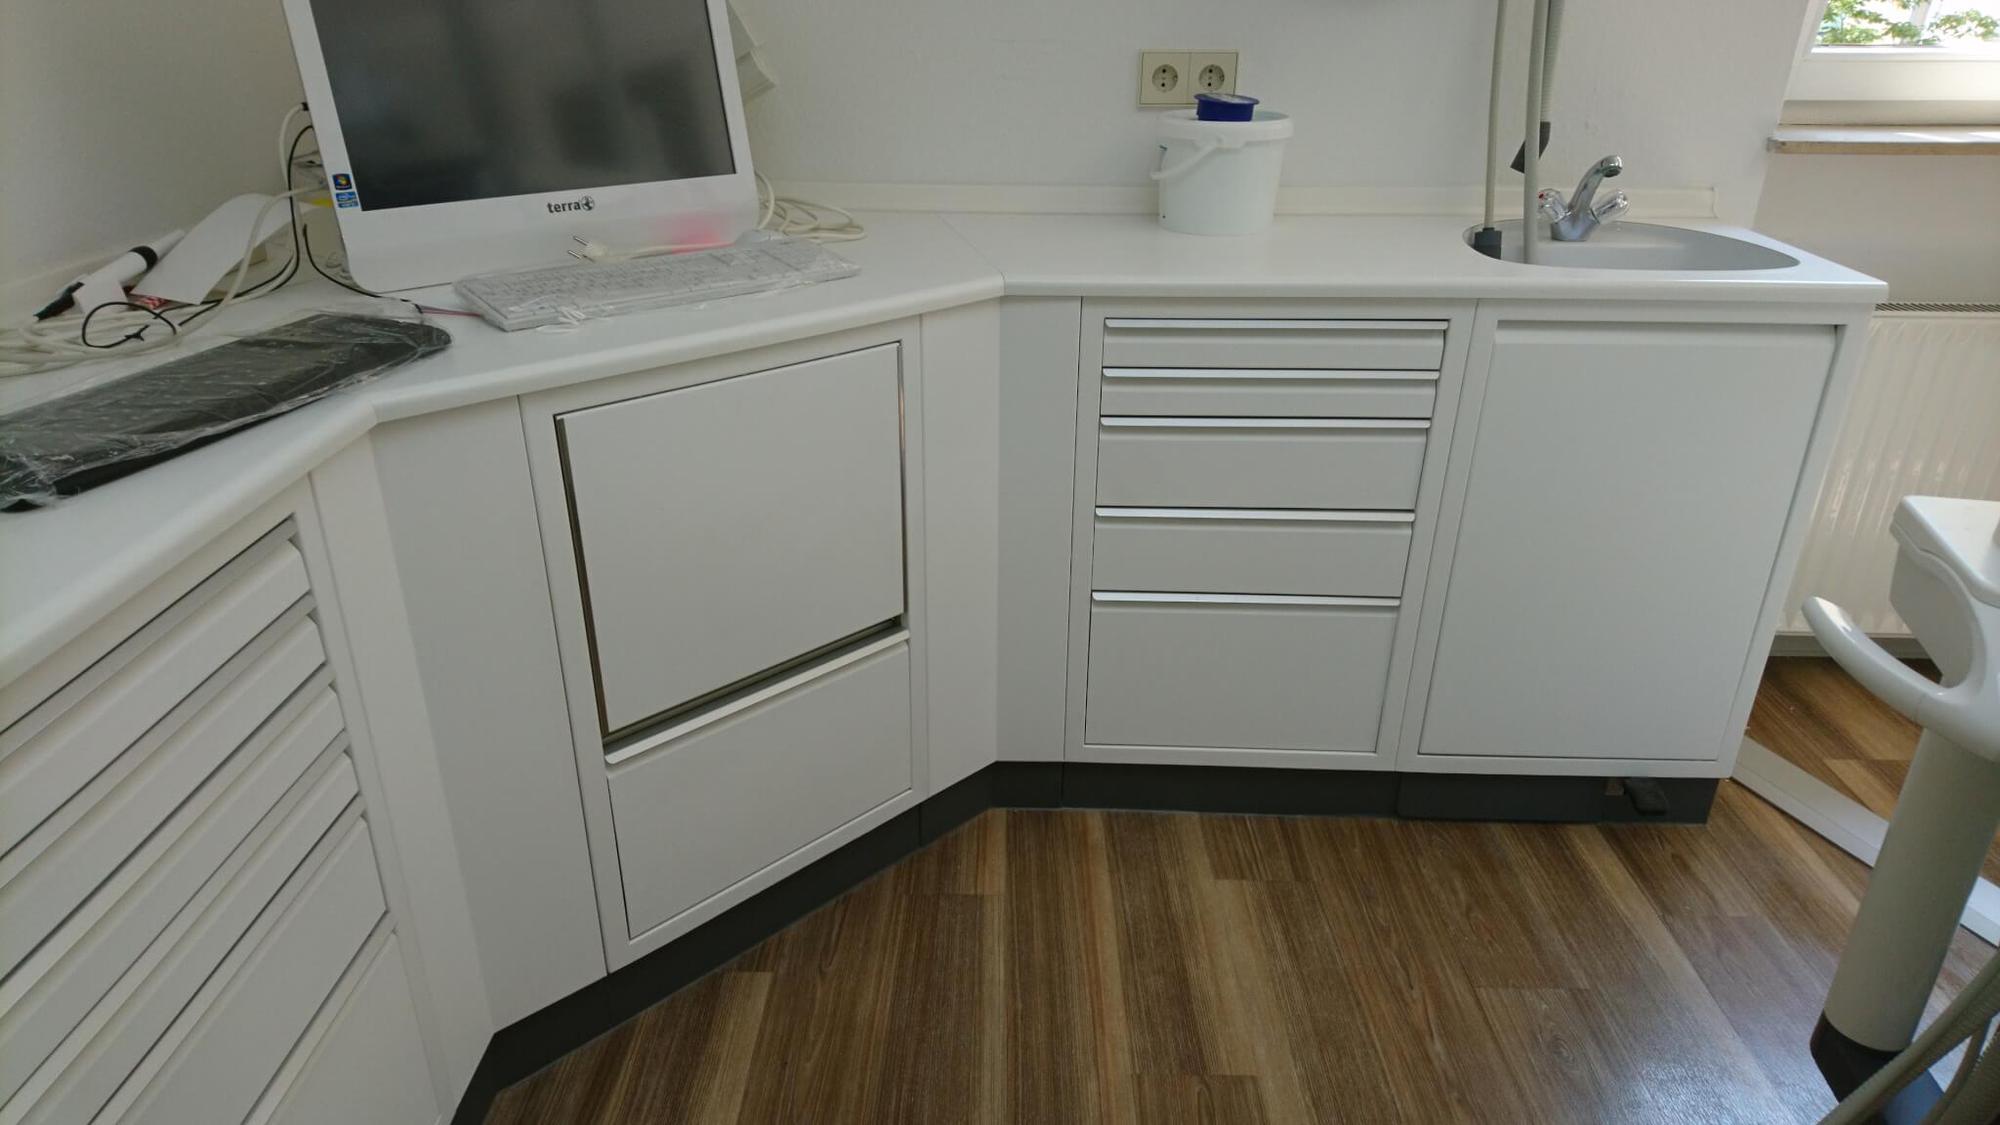 Renovating white metal doctor's medical practice furnishings, quickly and affordably 04